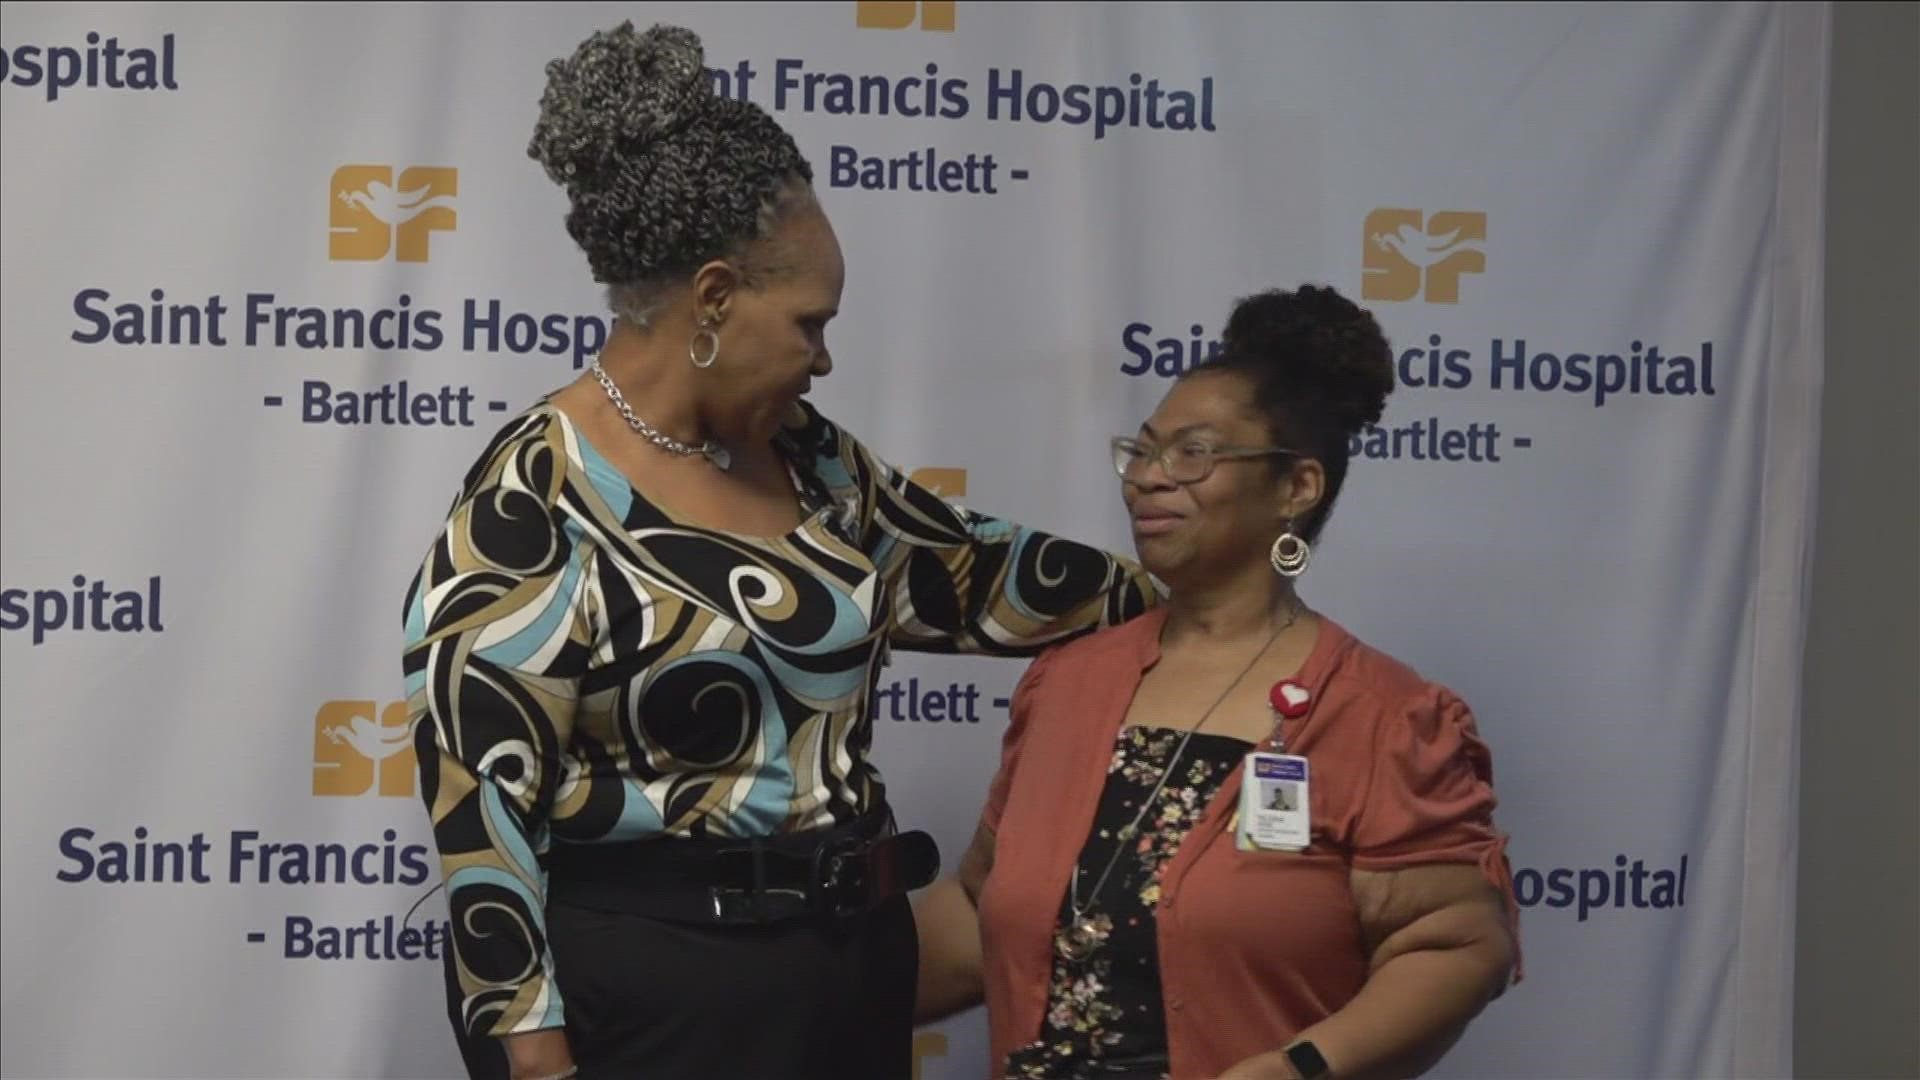 ABC24 Visual Storyteller Sheila Whaley introduces us to this special employee who gives back every day by taking care of others.